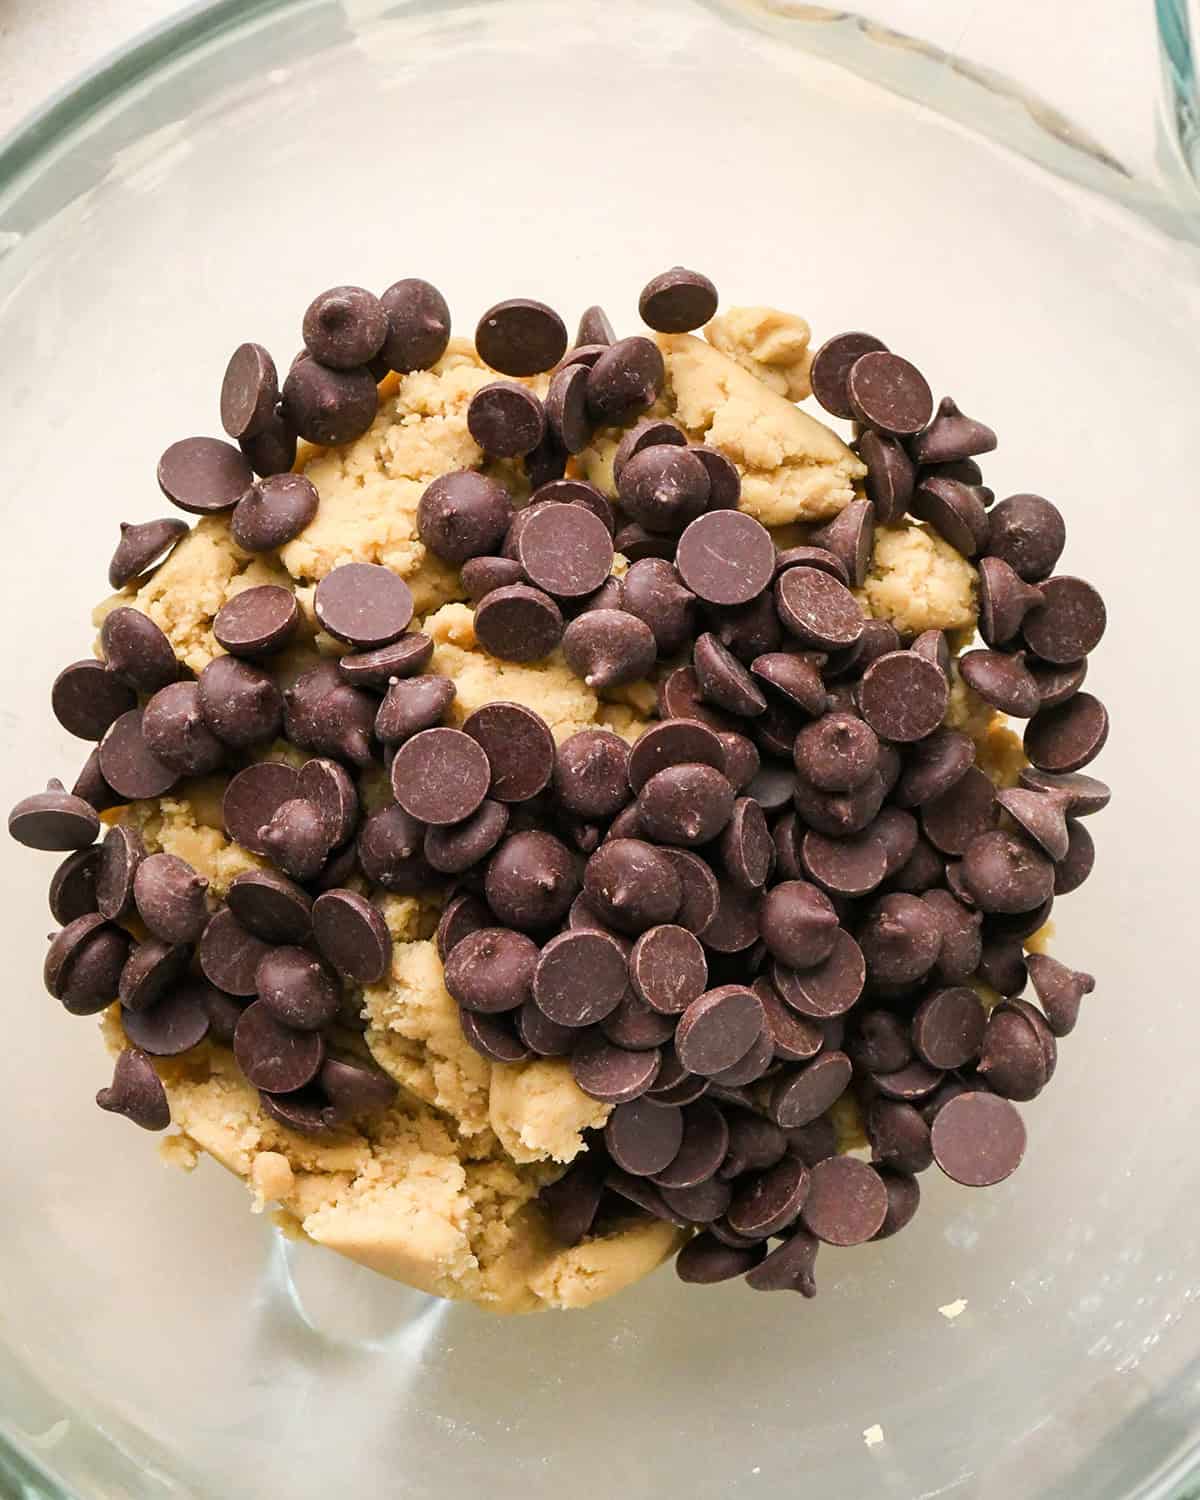 How to Make Edible Cookie Dough  - chocolate chips added before stirring